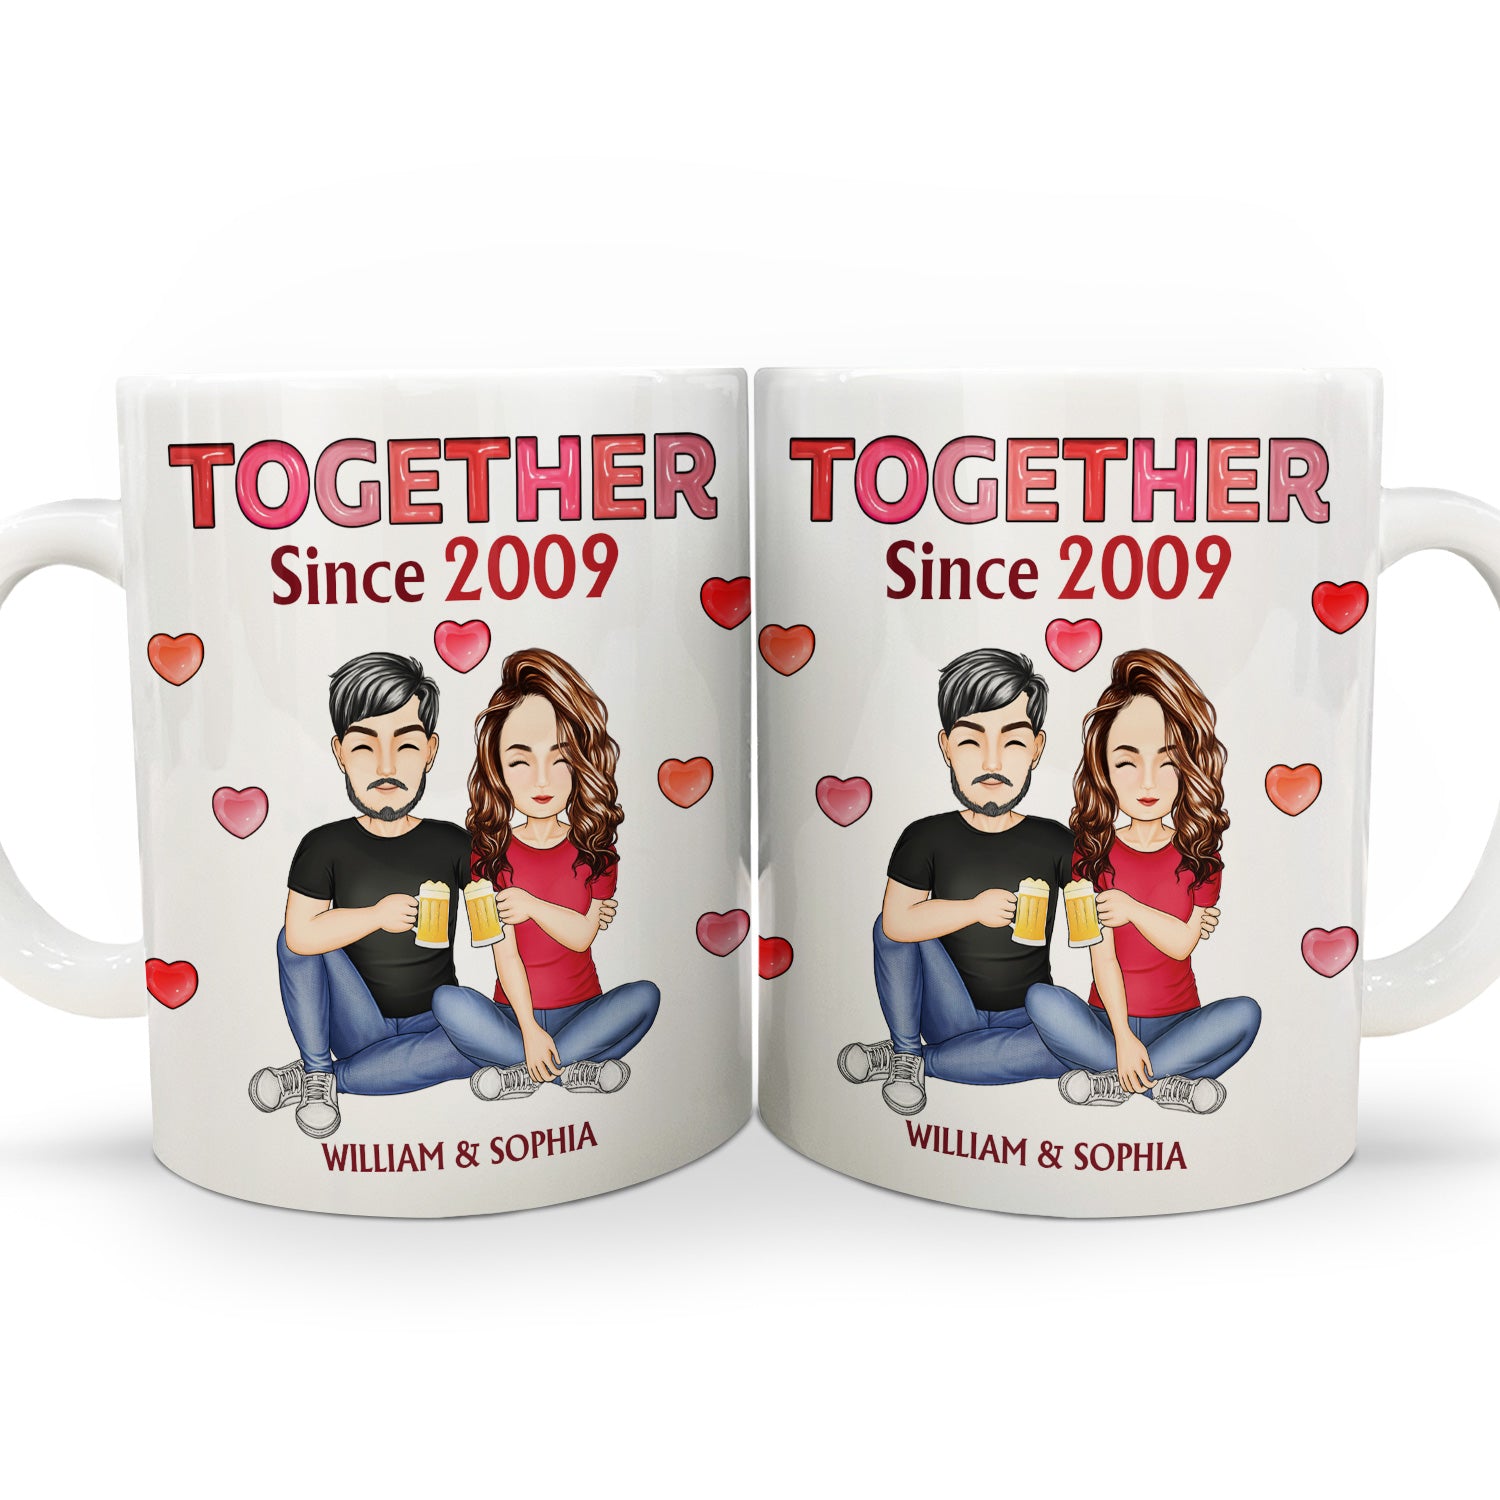 Together Since Cartoon Couple - Birthday, Anniversary Gift For Spouse, Husband, Wife - Personalized White Edge-to-Edge Mug